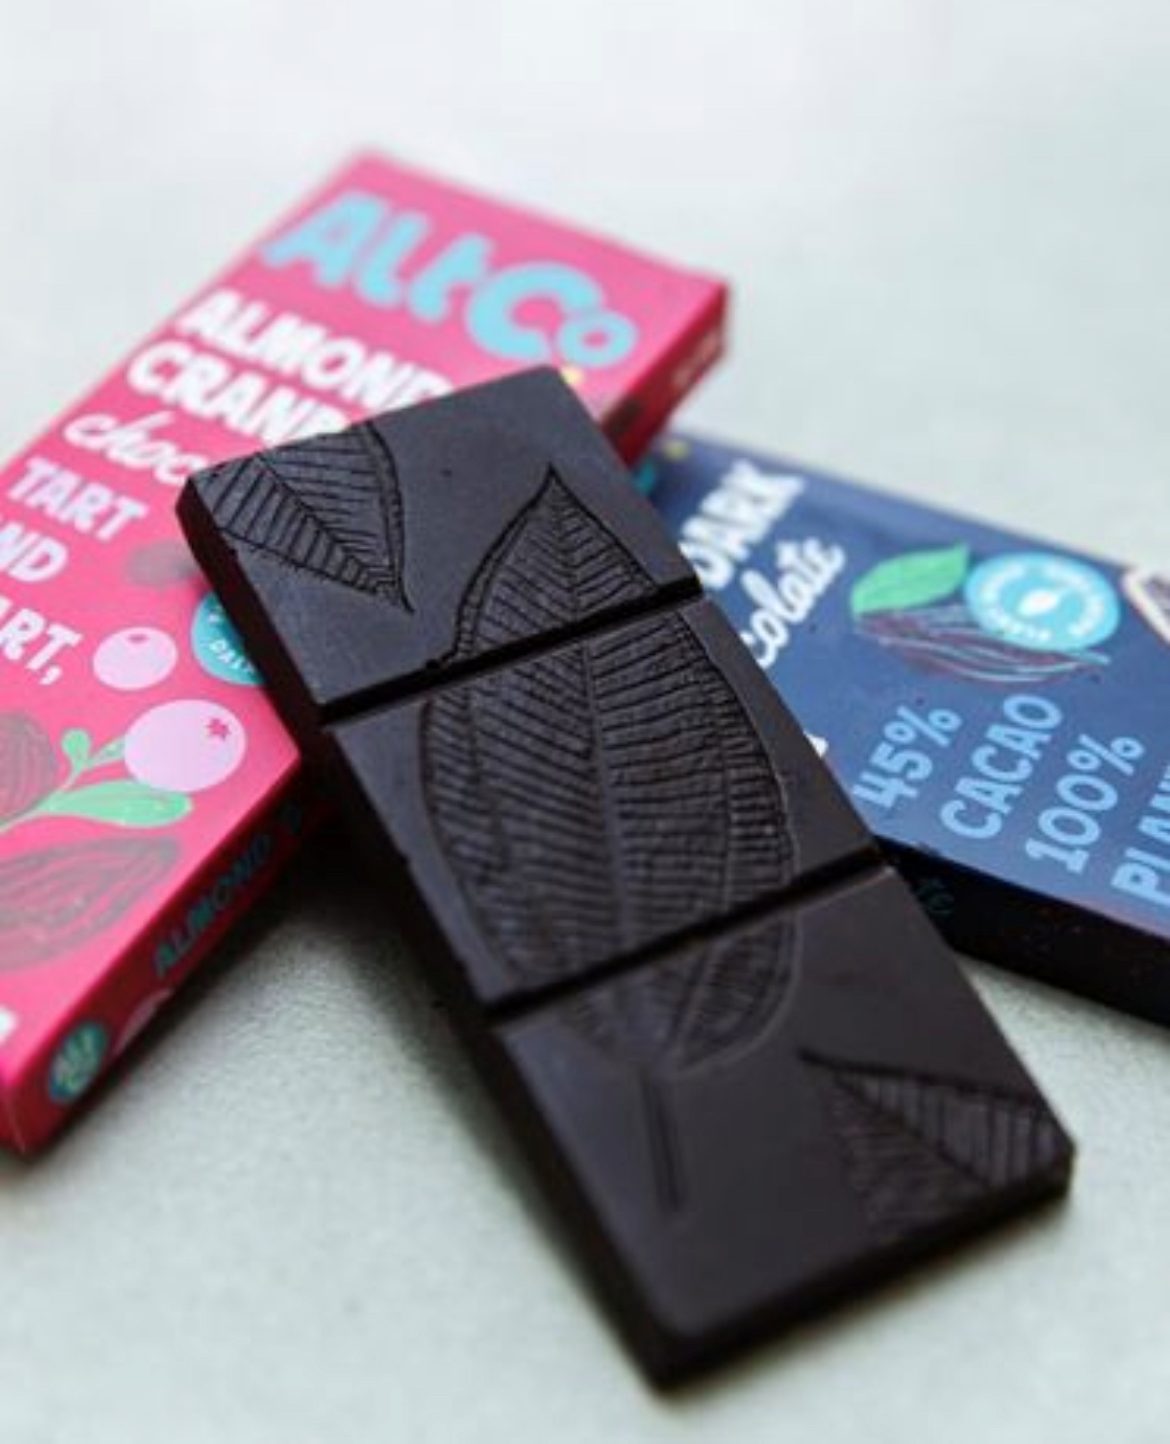 Complete guide to Vegan Chocolate by Alt co.